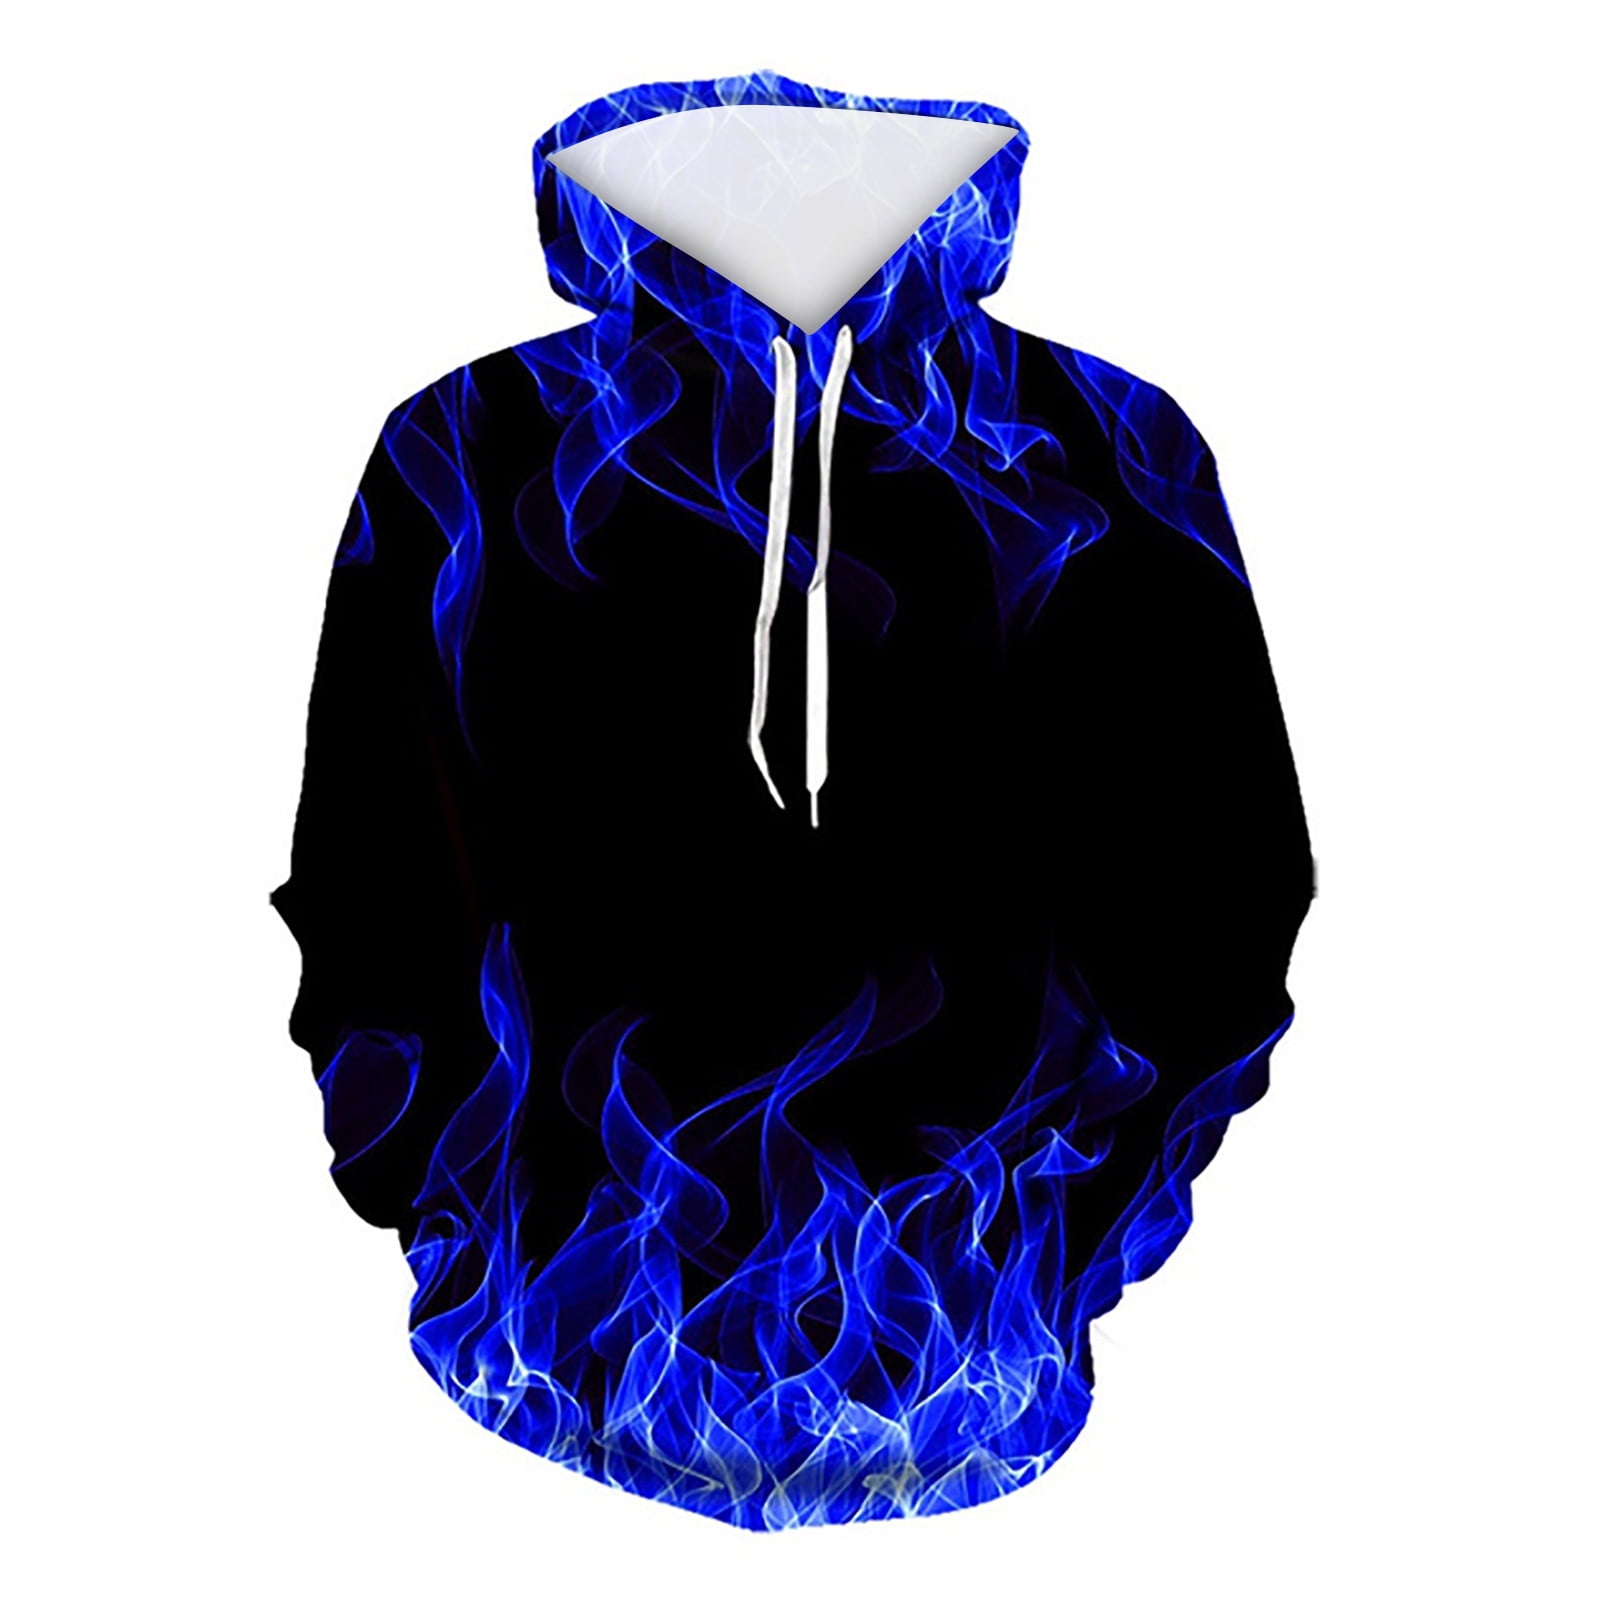 Oxodoi Deals Clearance Hoodies for Men, Mens Hoodies Hooded Sweater ...